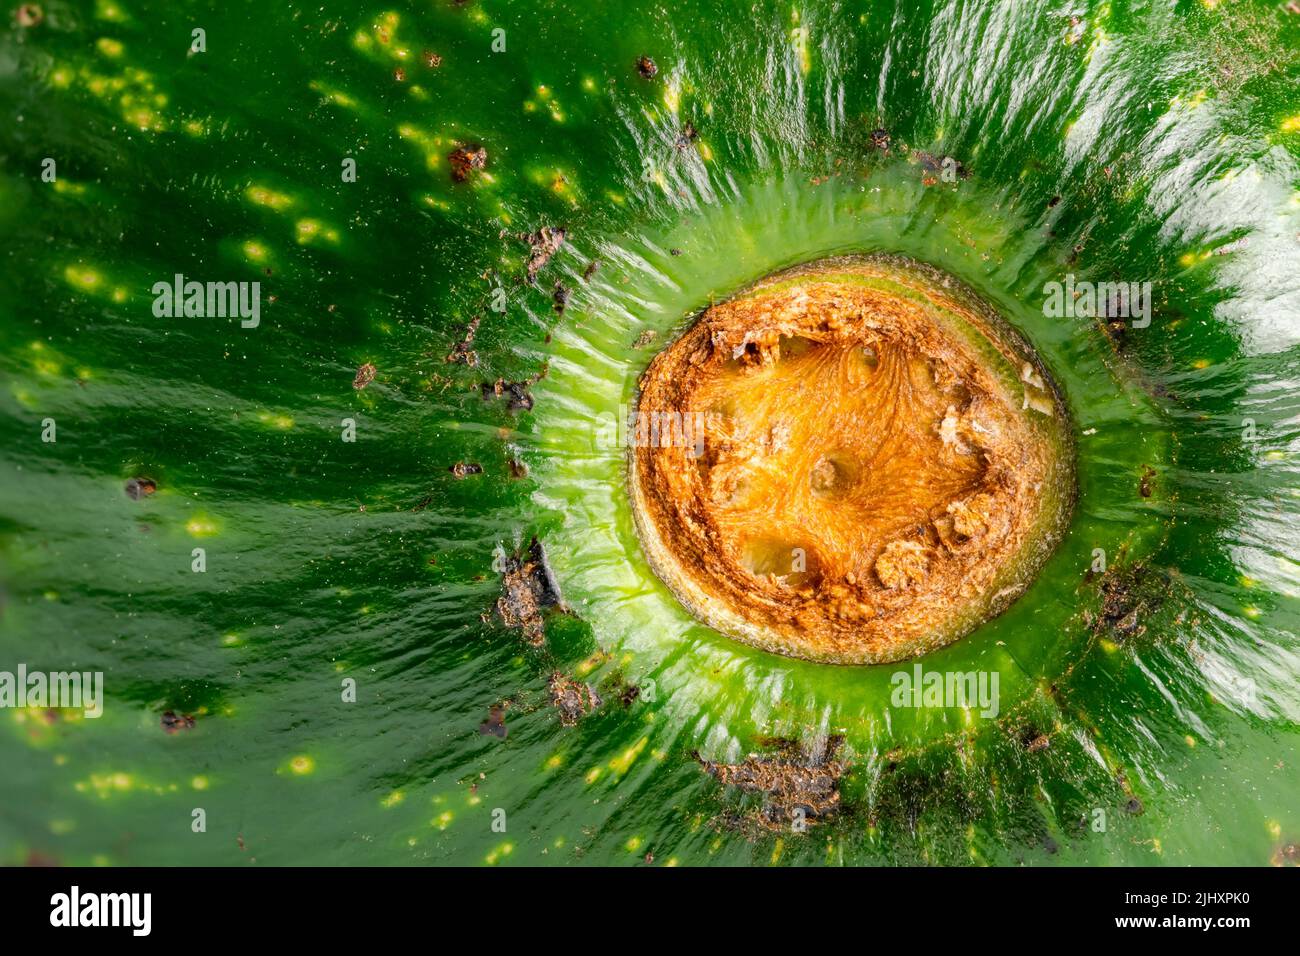 Extreme closeup view of green avocado stalk. Avocado, plant of a large berry containing a single large seed. Stock Photo